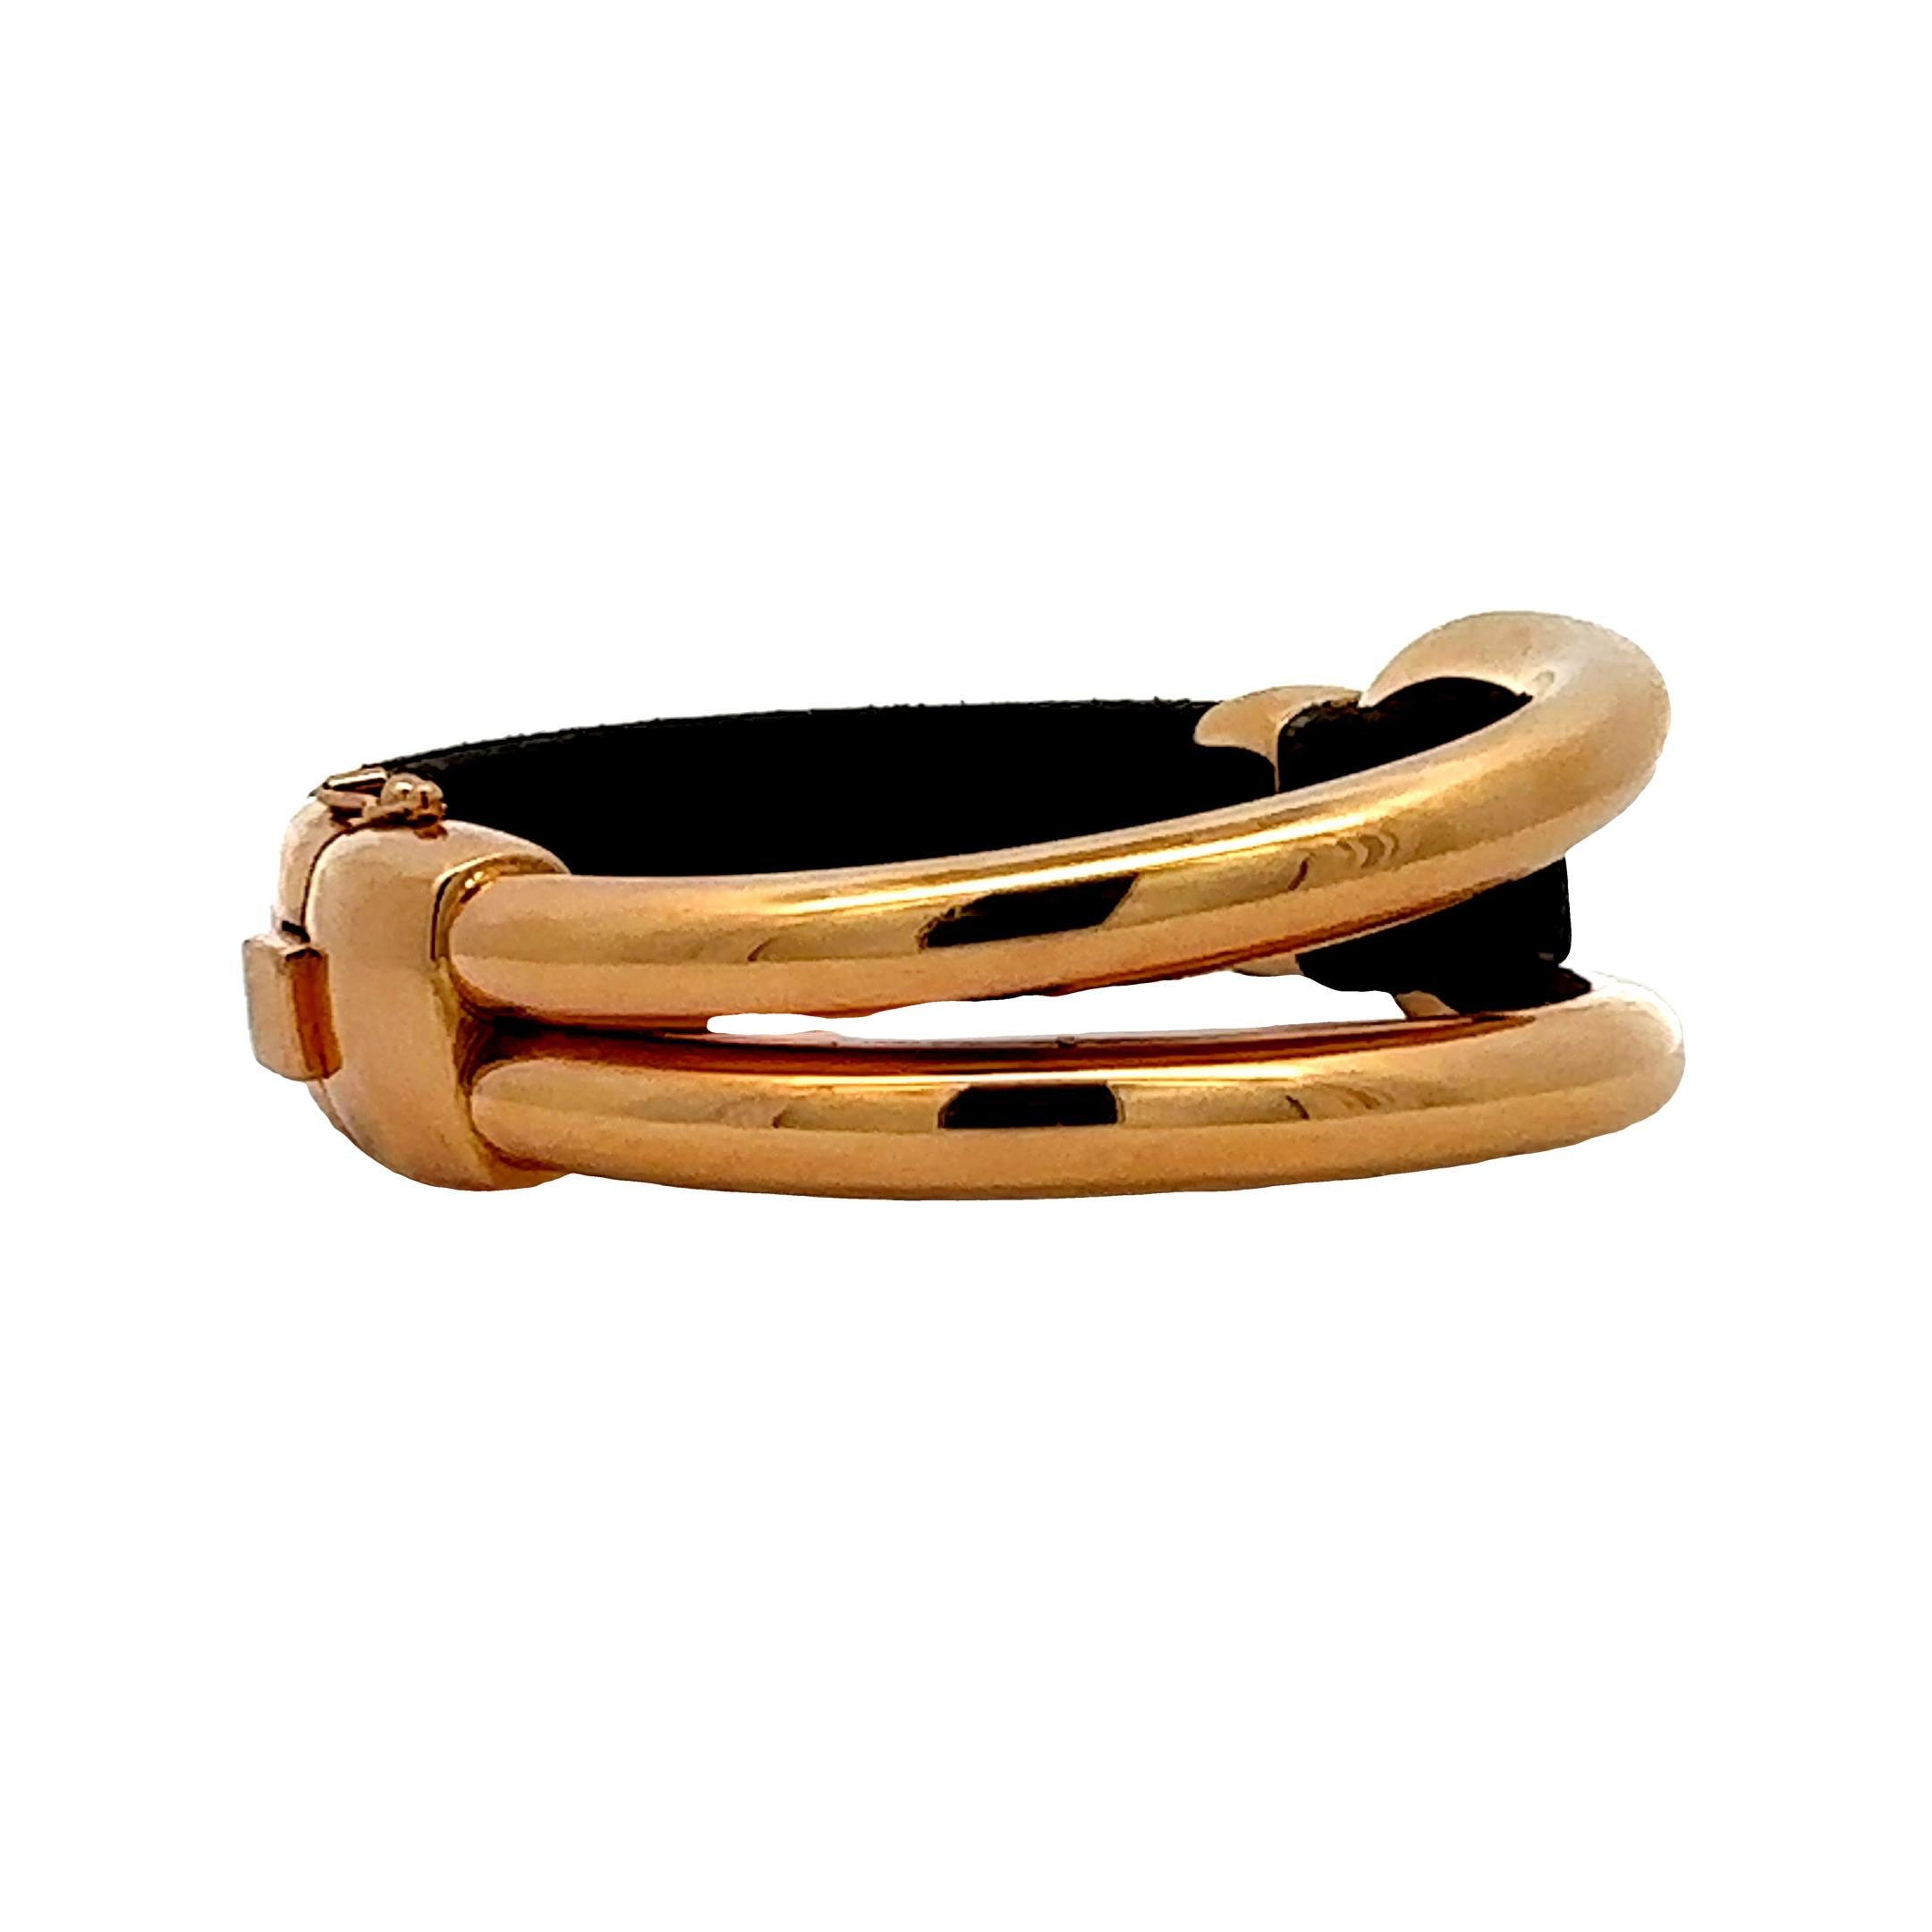 Oromalia Italian made bracelet, offered by Alex & Co. This fashionable bracelet features a bold rose gold oval tubular semi cuff style centerpiece weighing 26 grams. The piece is secured by a brown natural leather strap with a rose gold accent. The